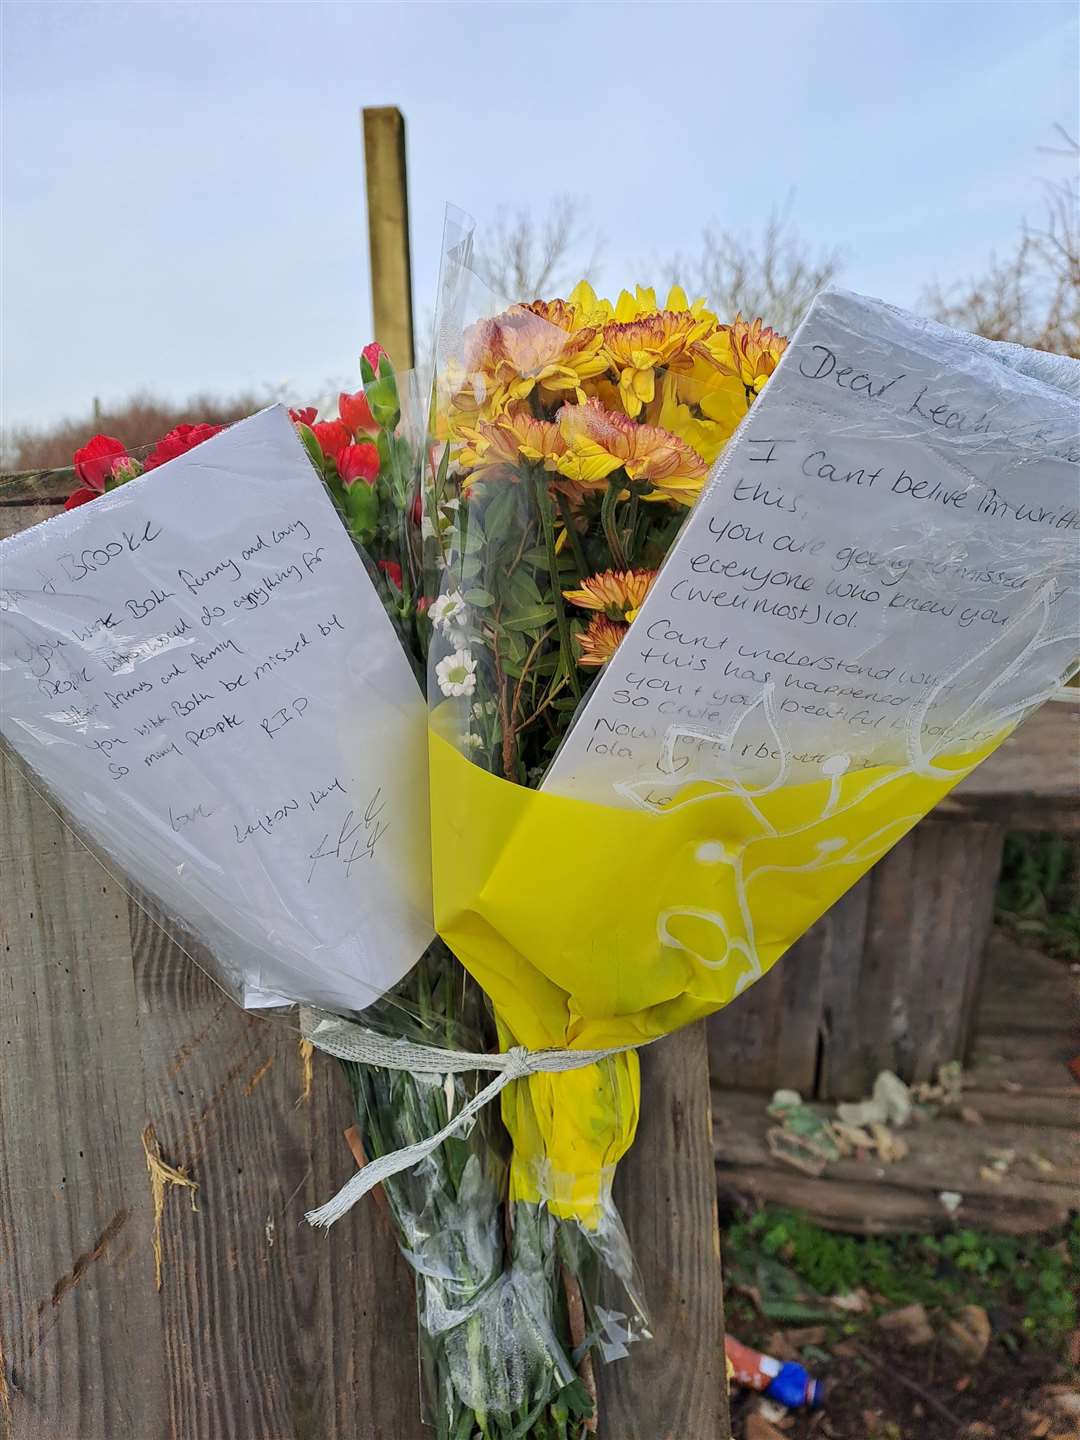 Flowers left at the scene of the tragedy in Whitstable